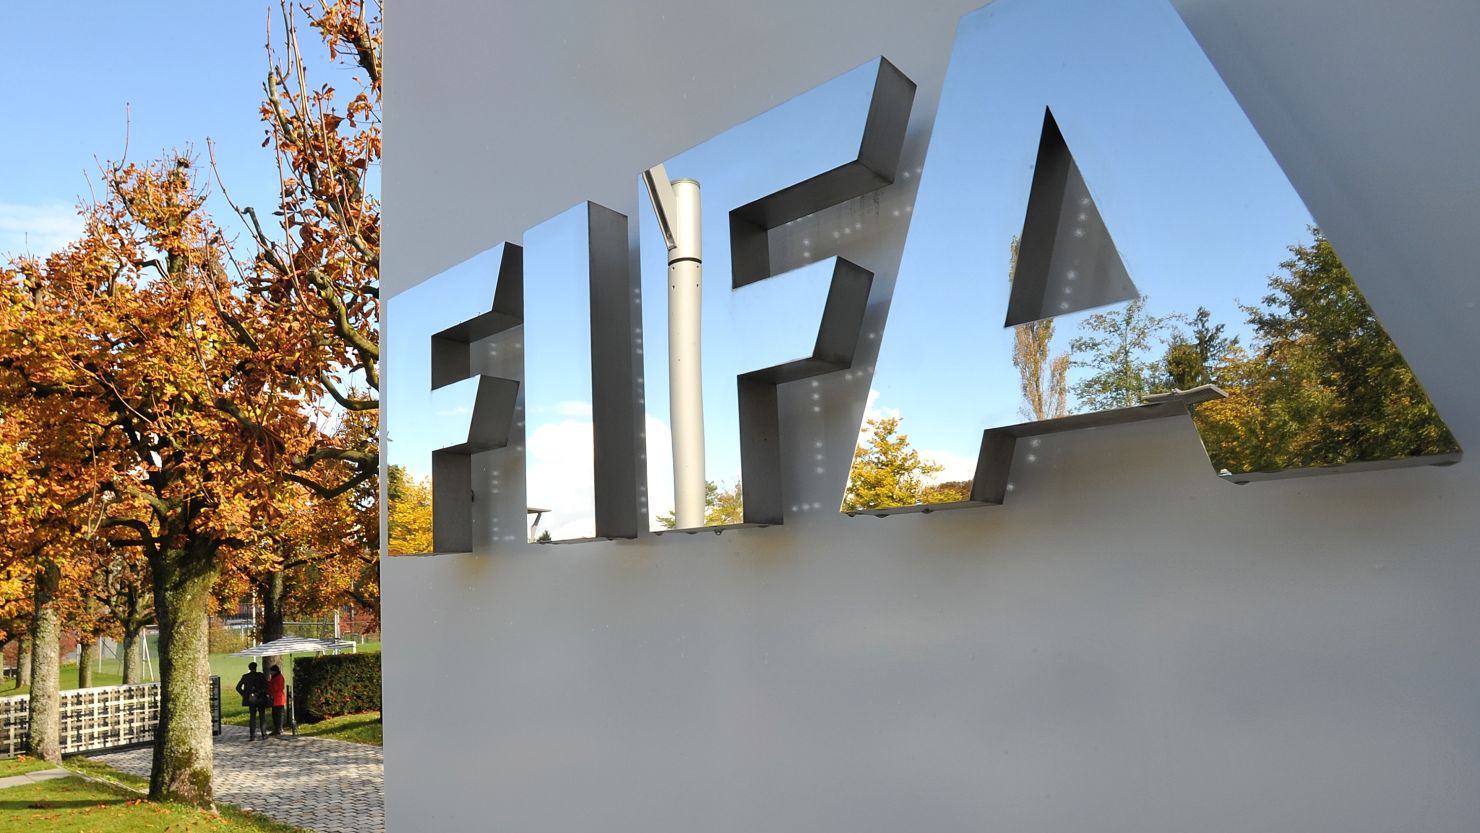 FIFA has imposed worldwide lifetime bans on 41 Korean players on charges of match-fixing